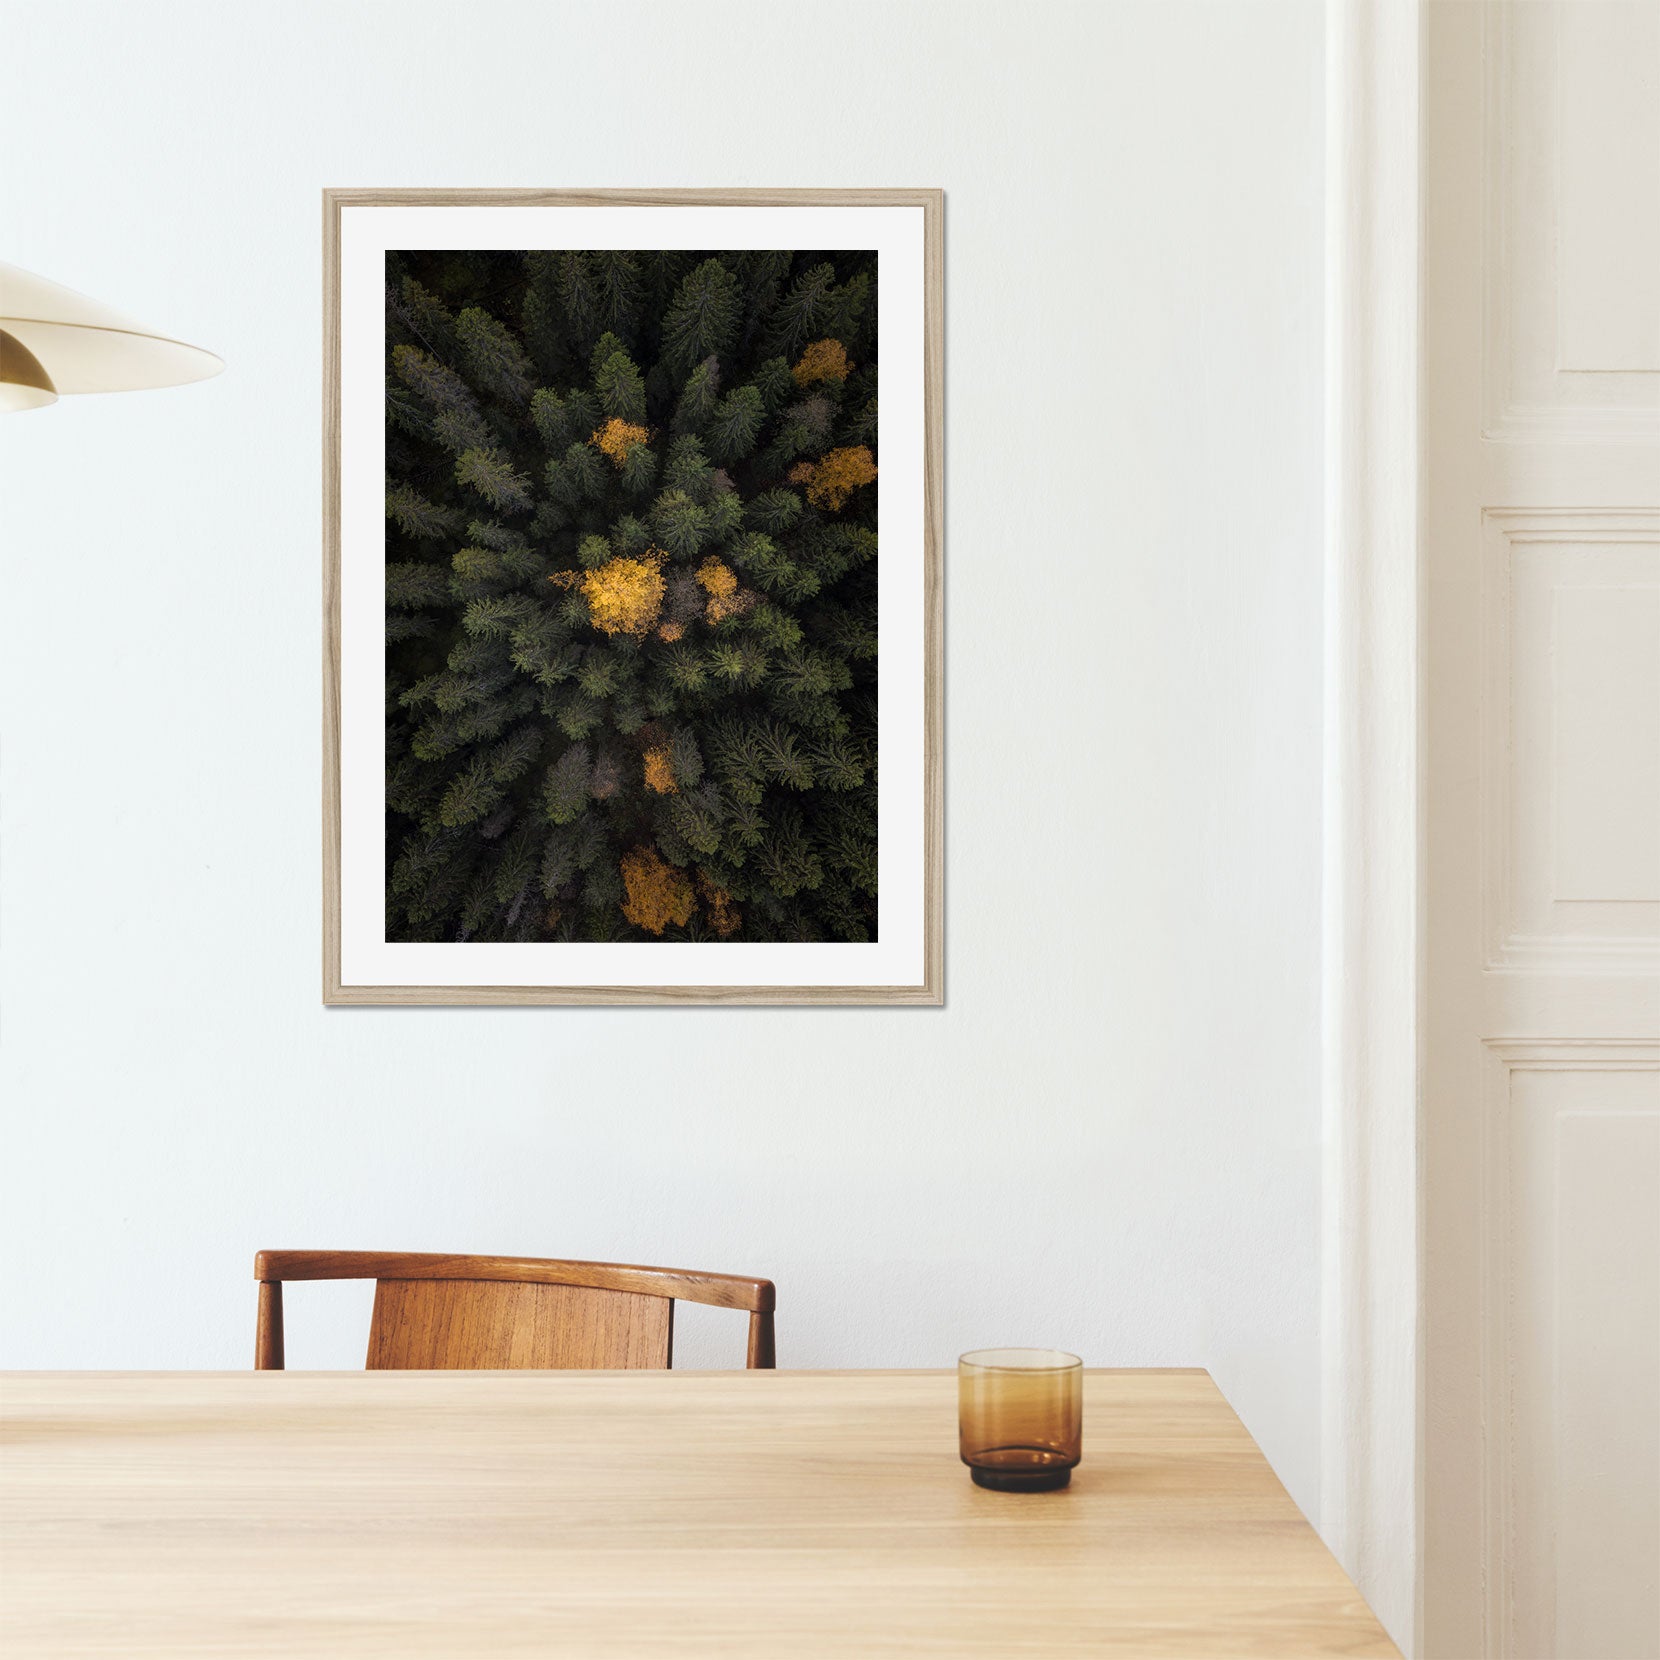 A framed print of a forest from above